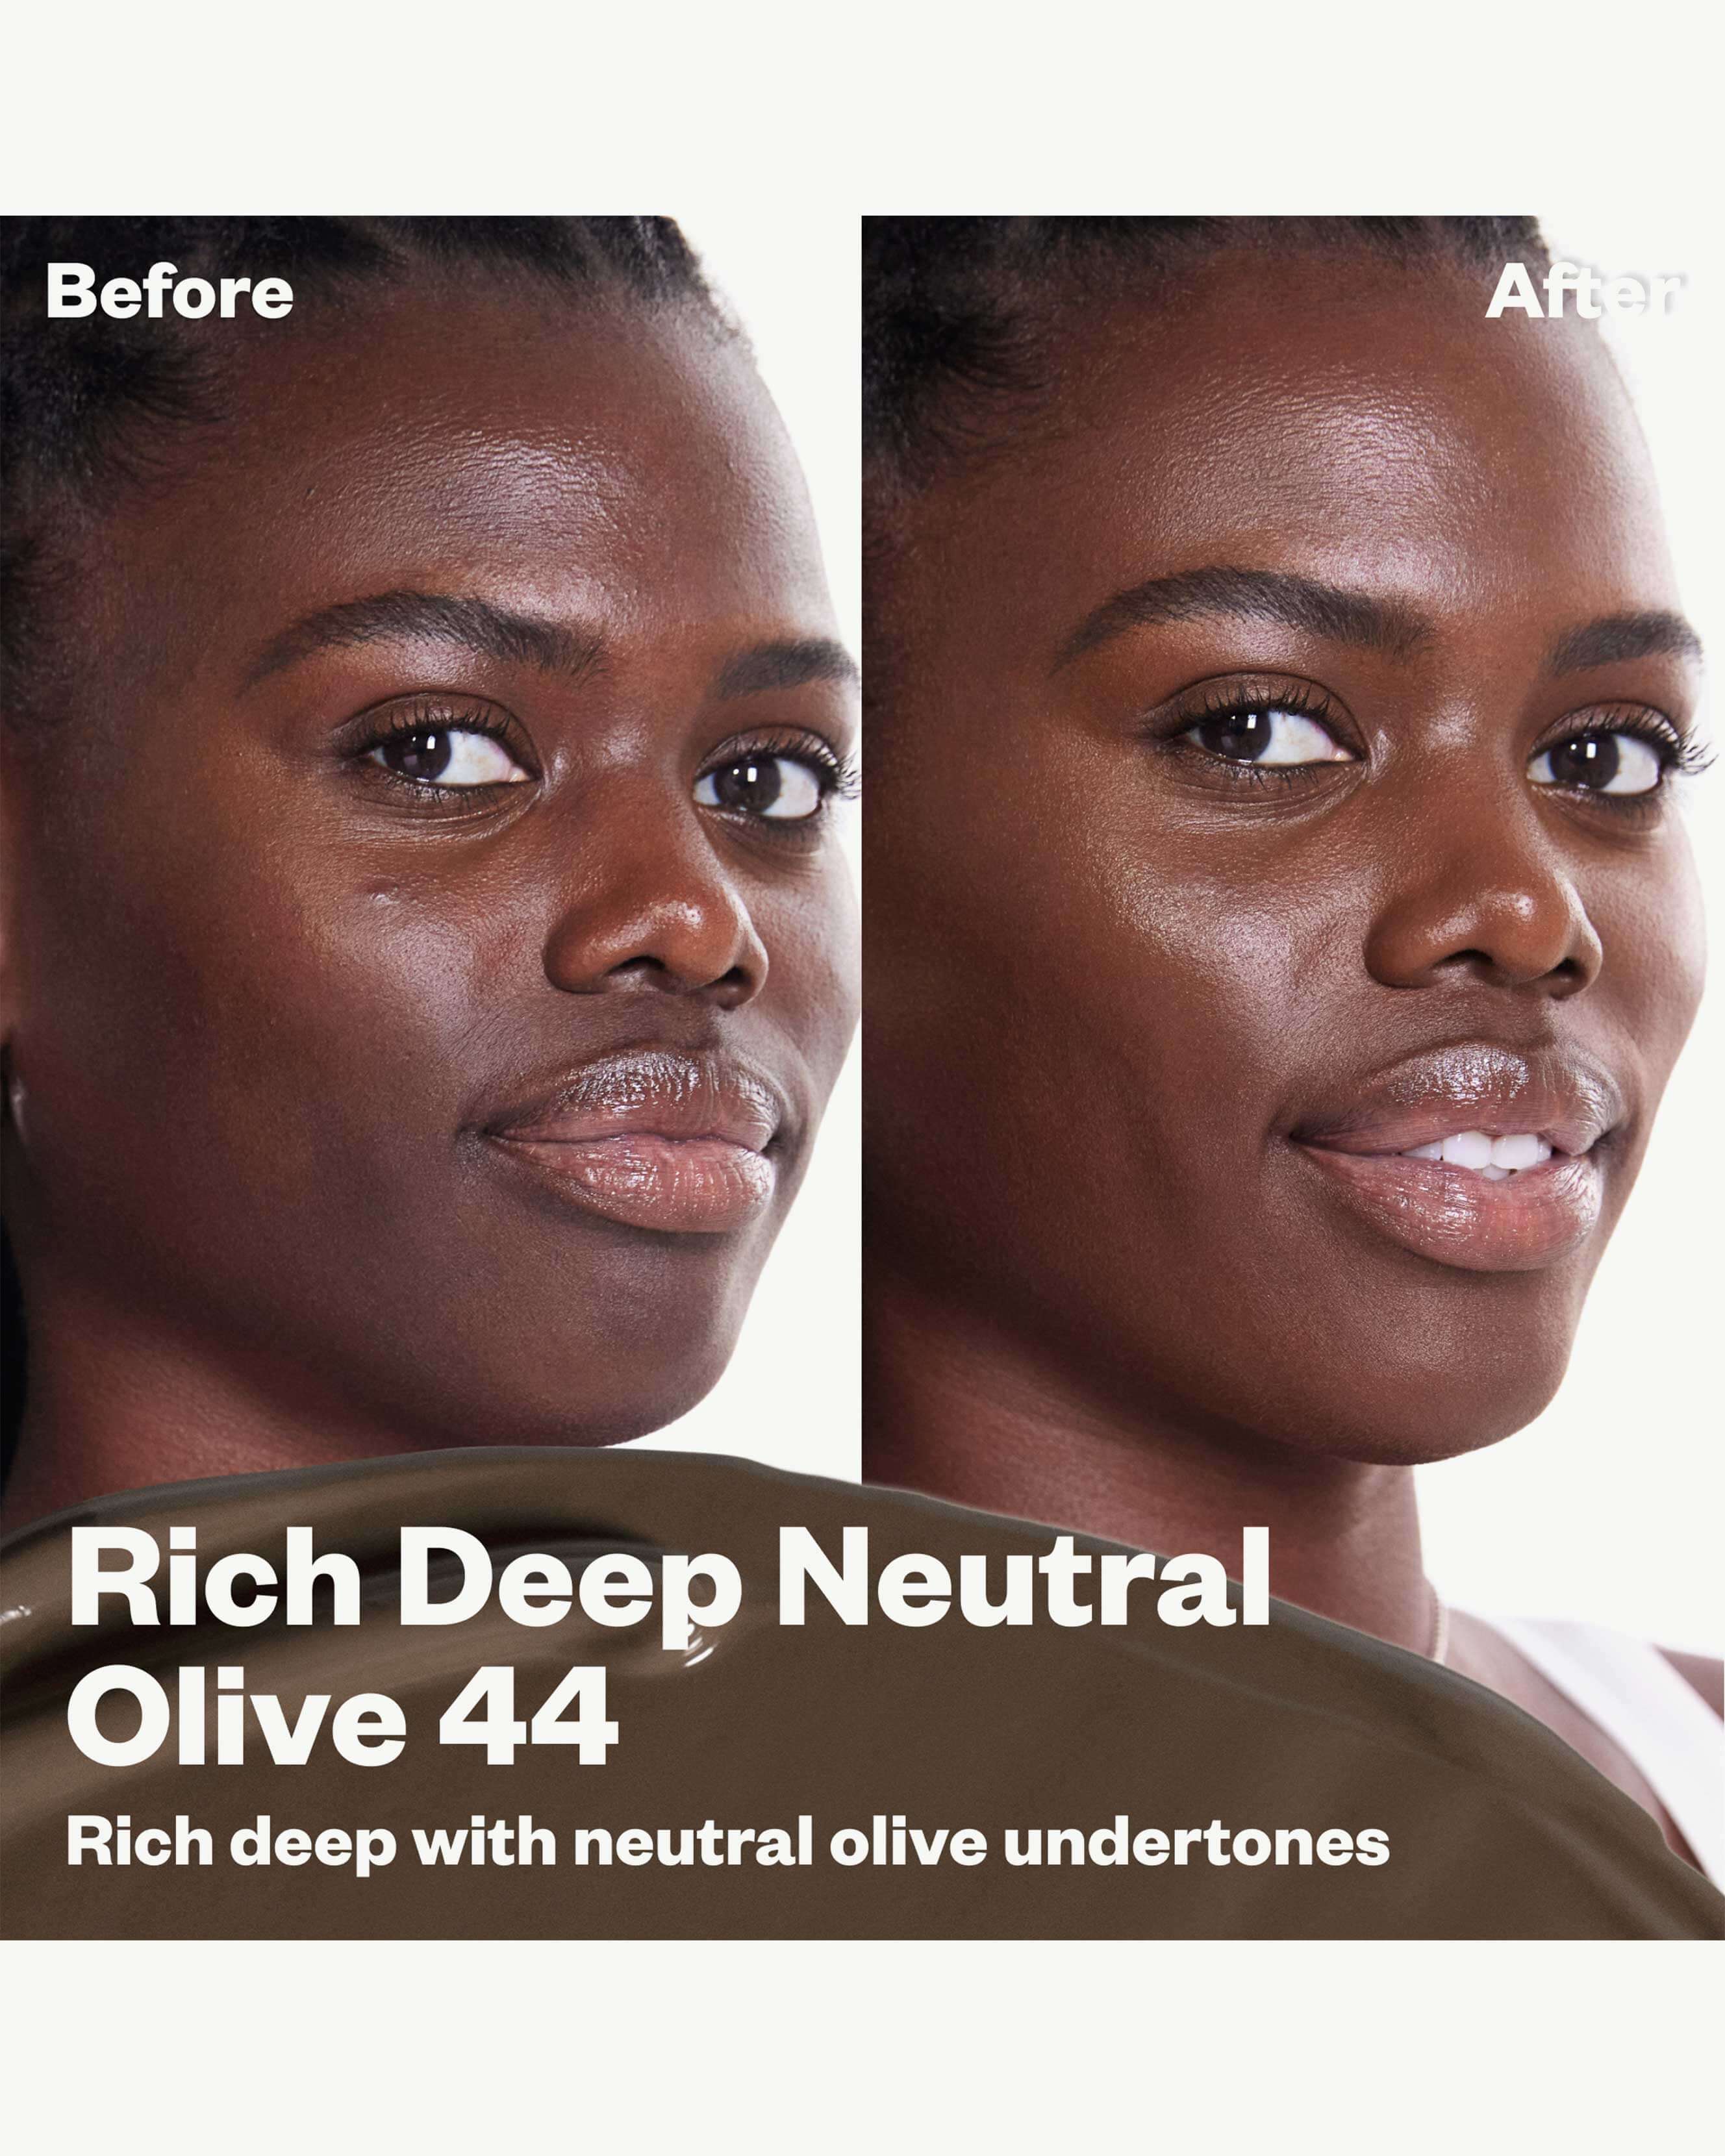 44 NO (rich deep with neutral olive undertones)